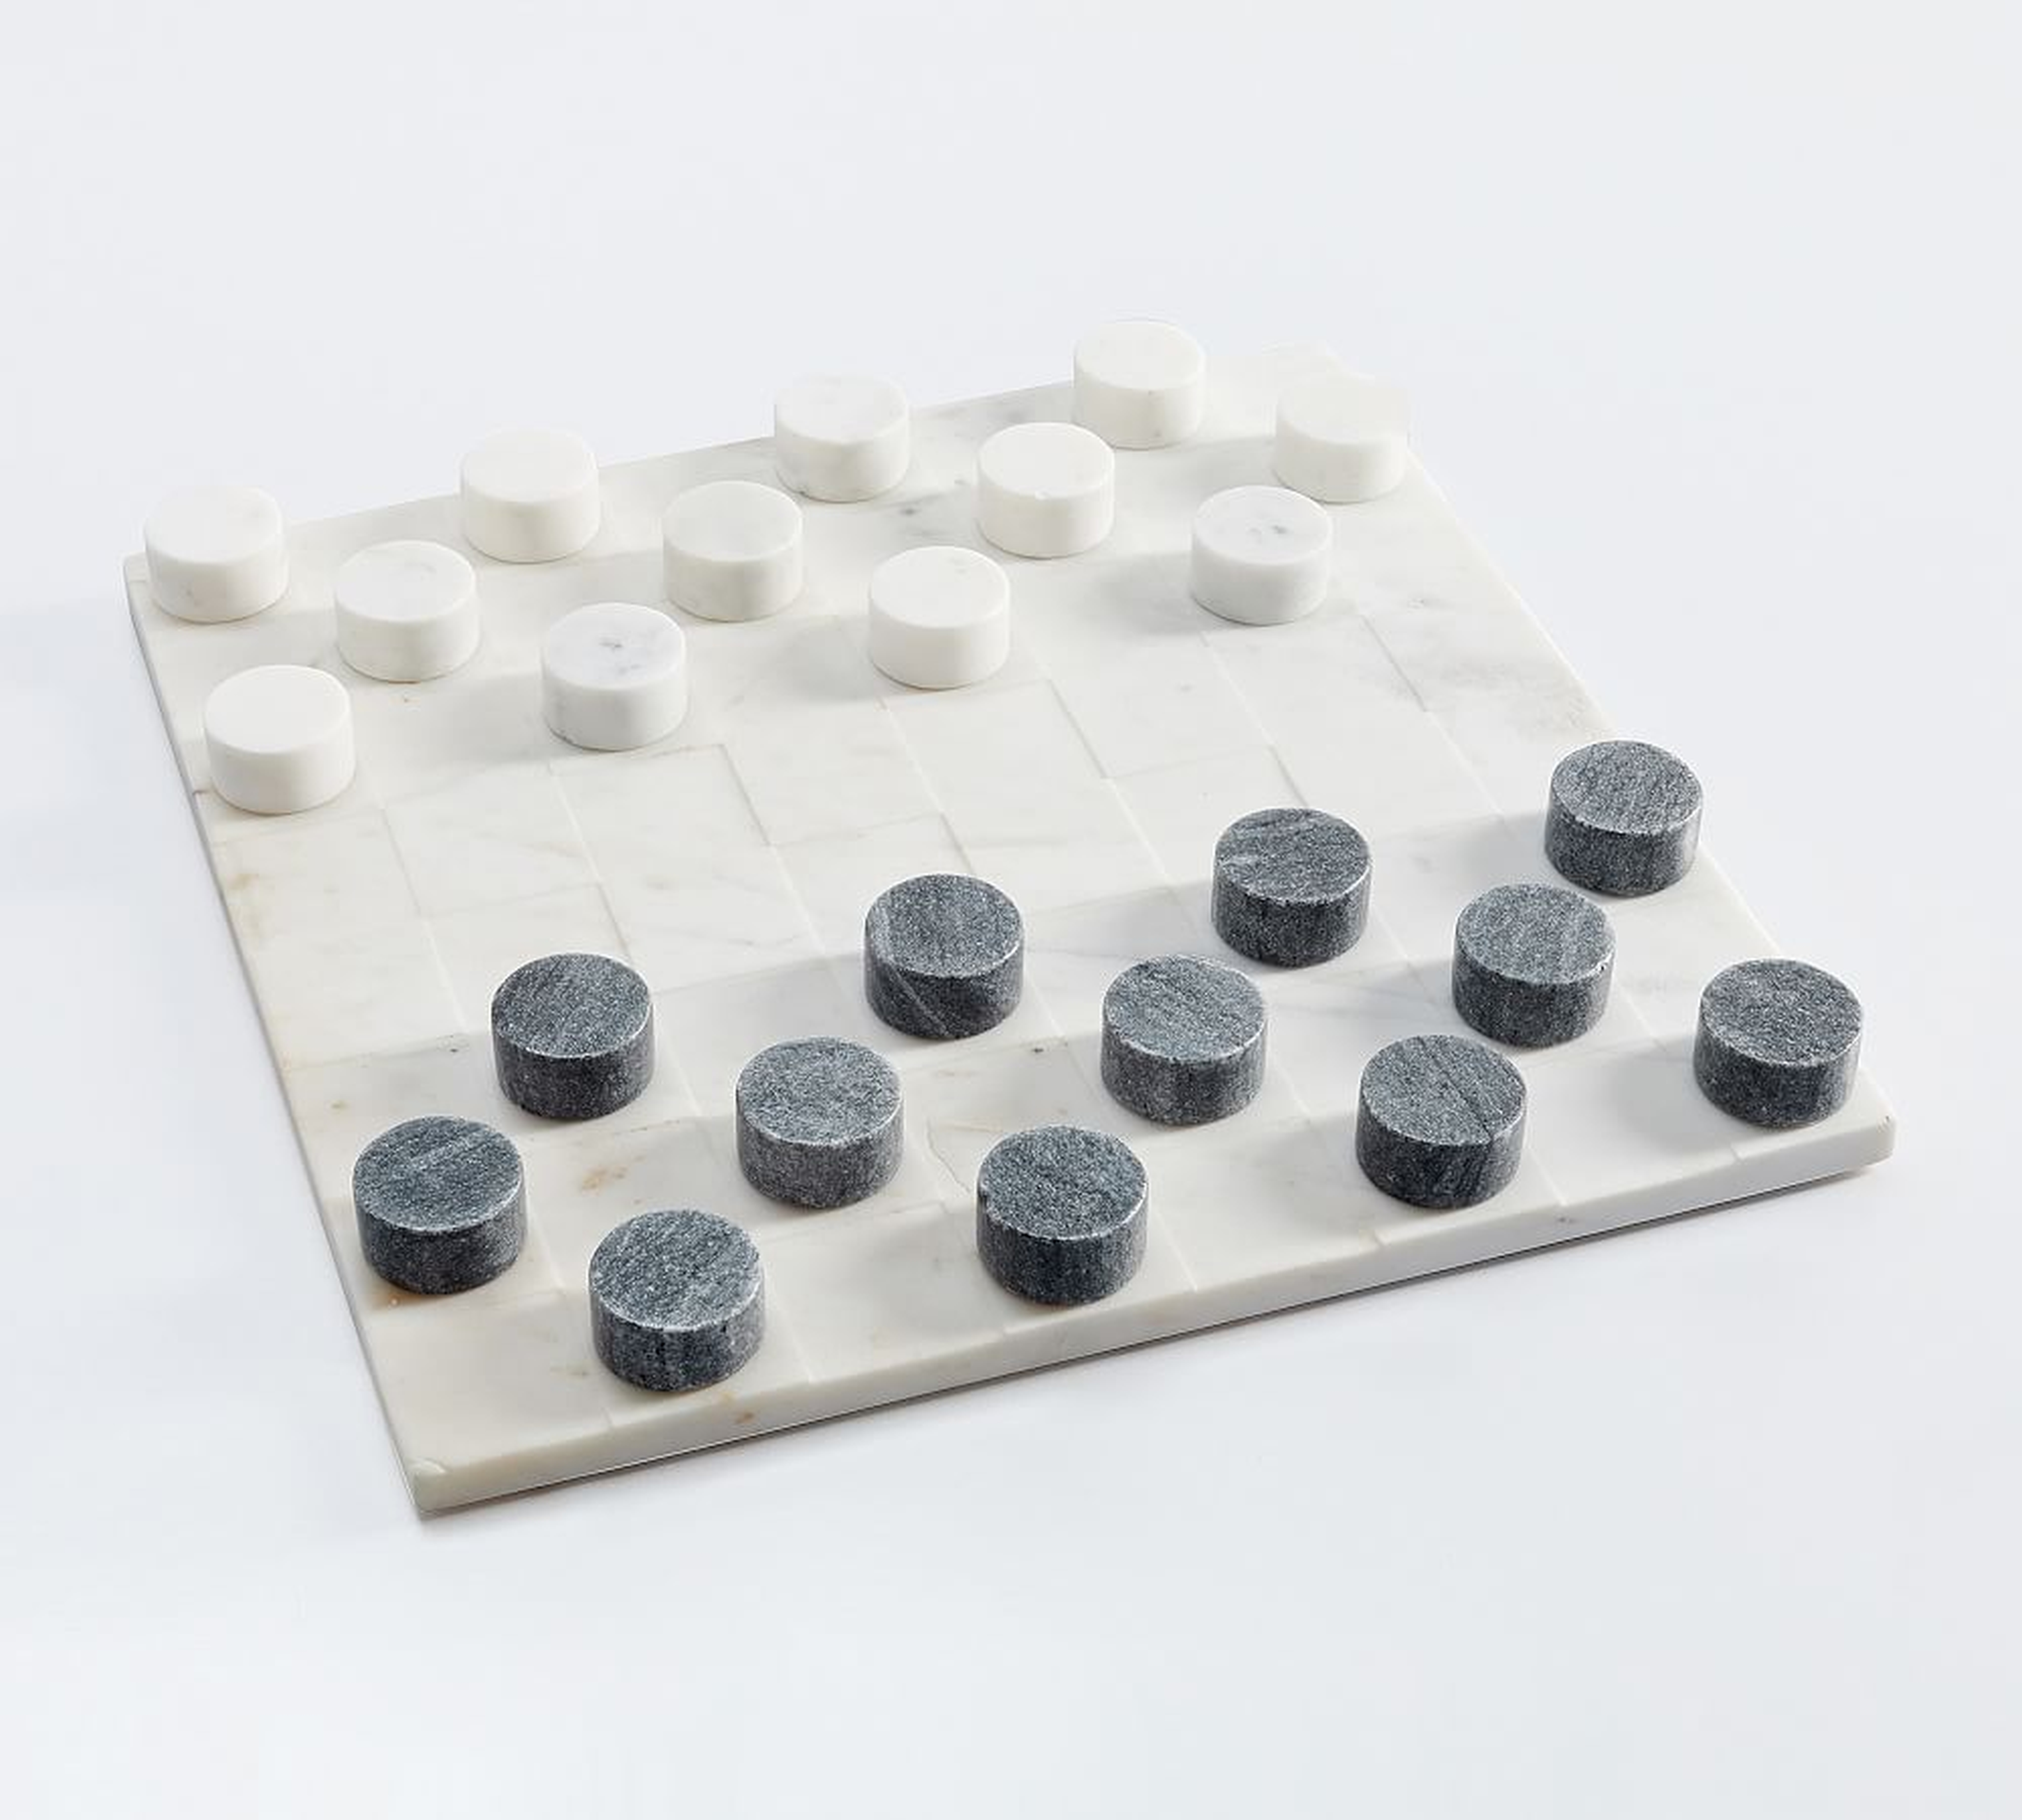 Handcrafted Marble Checkers Board Game - Pottery Barn